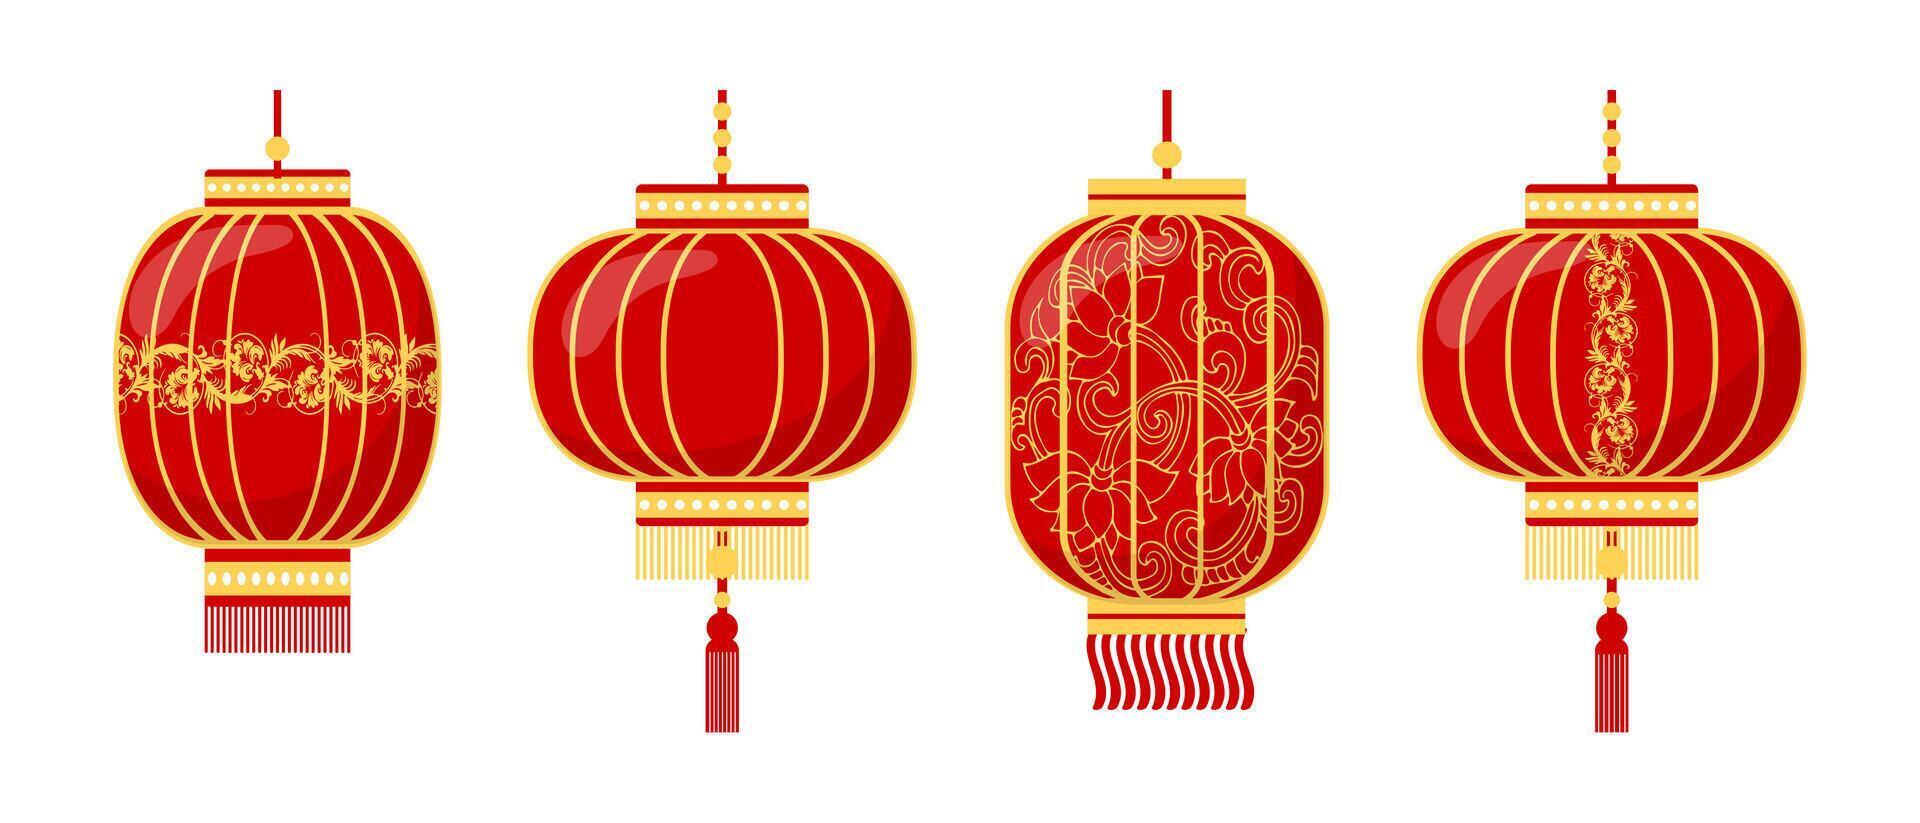 Set of colorful Chinese lanterns with patterns and dragons. Decor elements for Lantern Festival. icons, vector